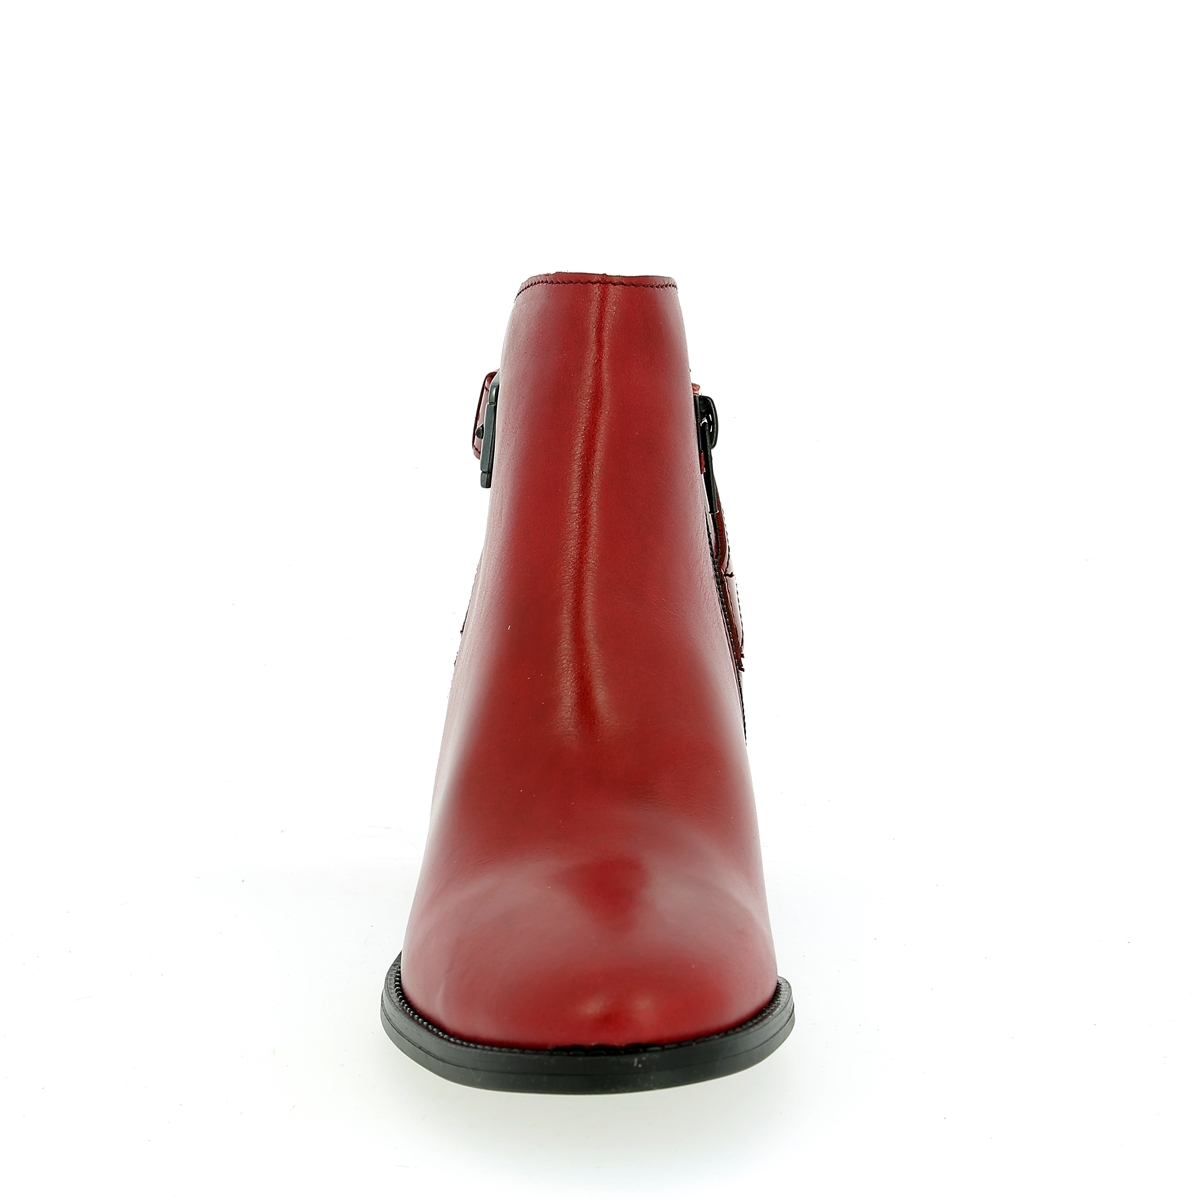 Cypres Boots rouge